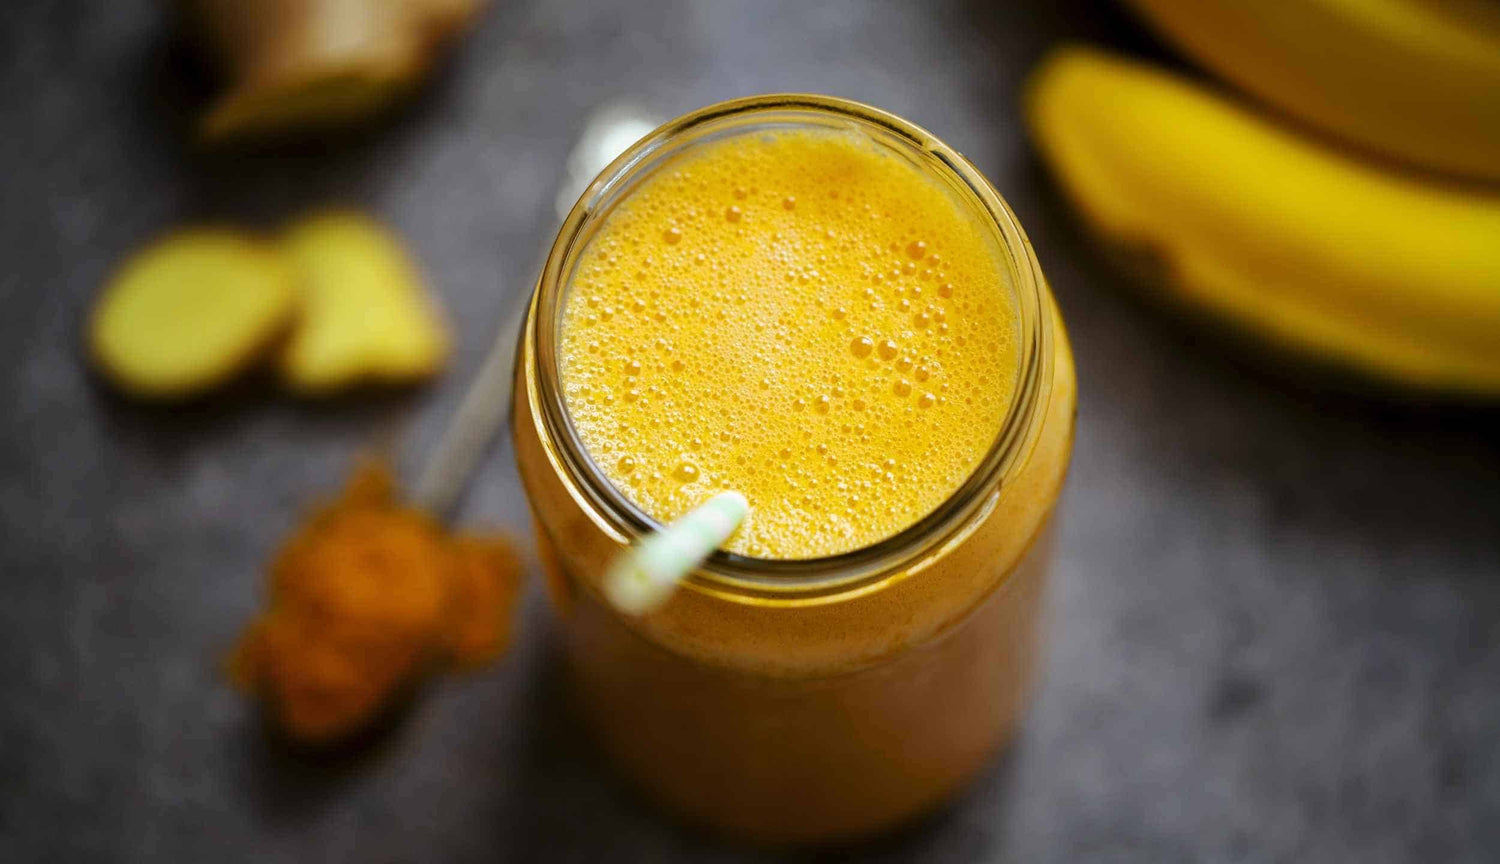 Try Our Anti-Inflammatory Turmeric Smoothie